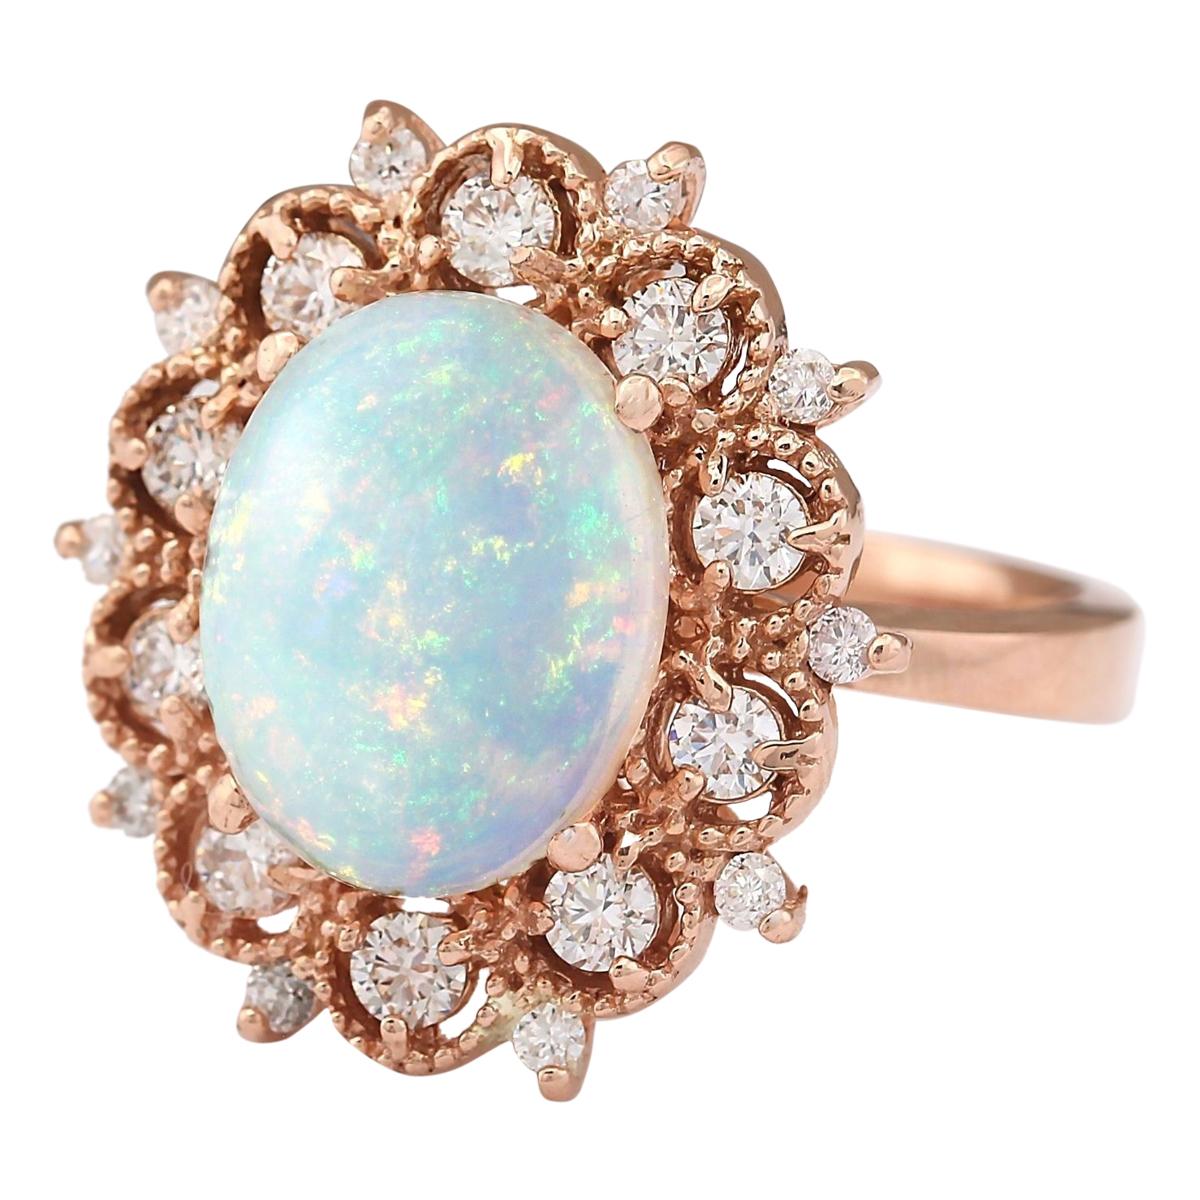 Stamped: 14K Rose Gold
Total Ring Weight: 8.1 Grams
Total Natural Opal Weight is 3.40 Carat (Measures: 13.00x10.00 mm)
Color: Multicolor
Total Natural Diamond Weight is 0.75 Carat
Color: F-G, Clarity: VS2-SI1
Face Measures: 21.10x20.15 mm
Sku: